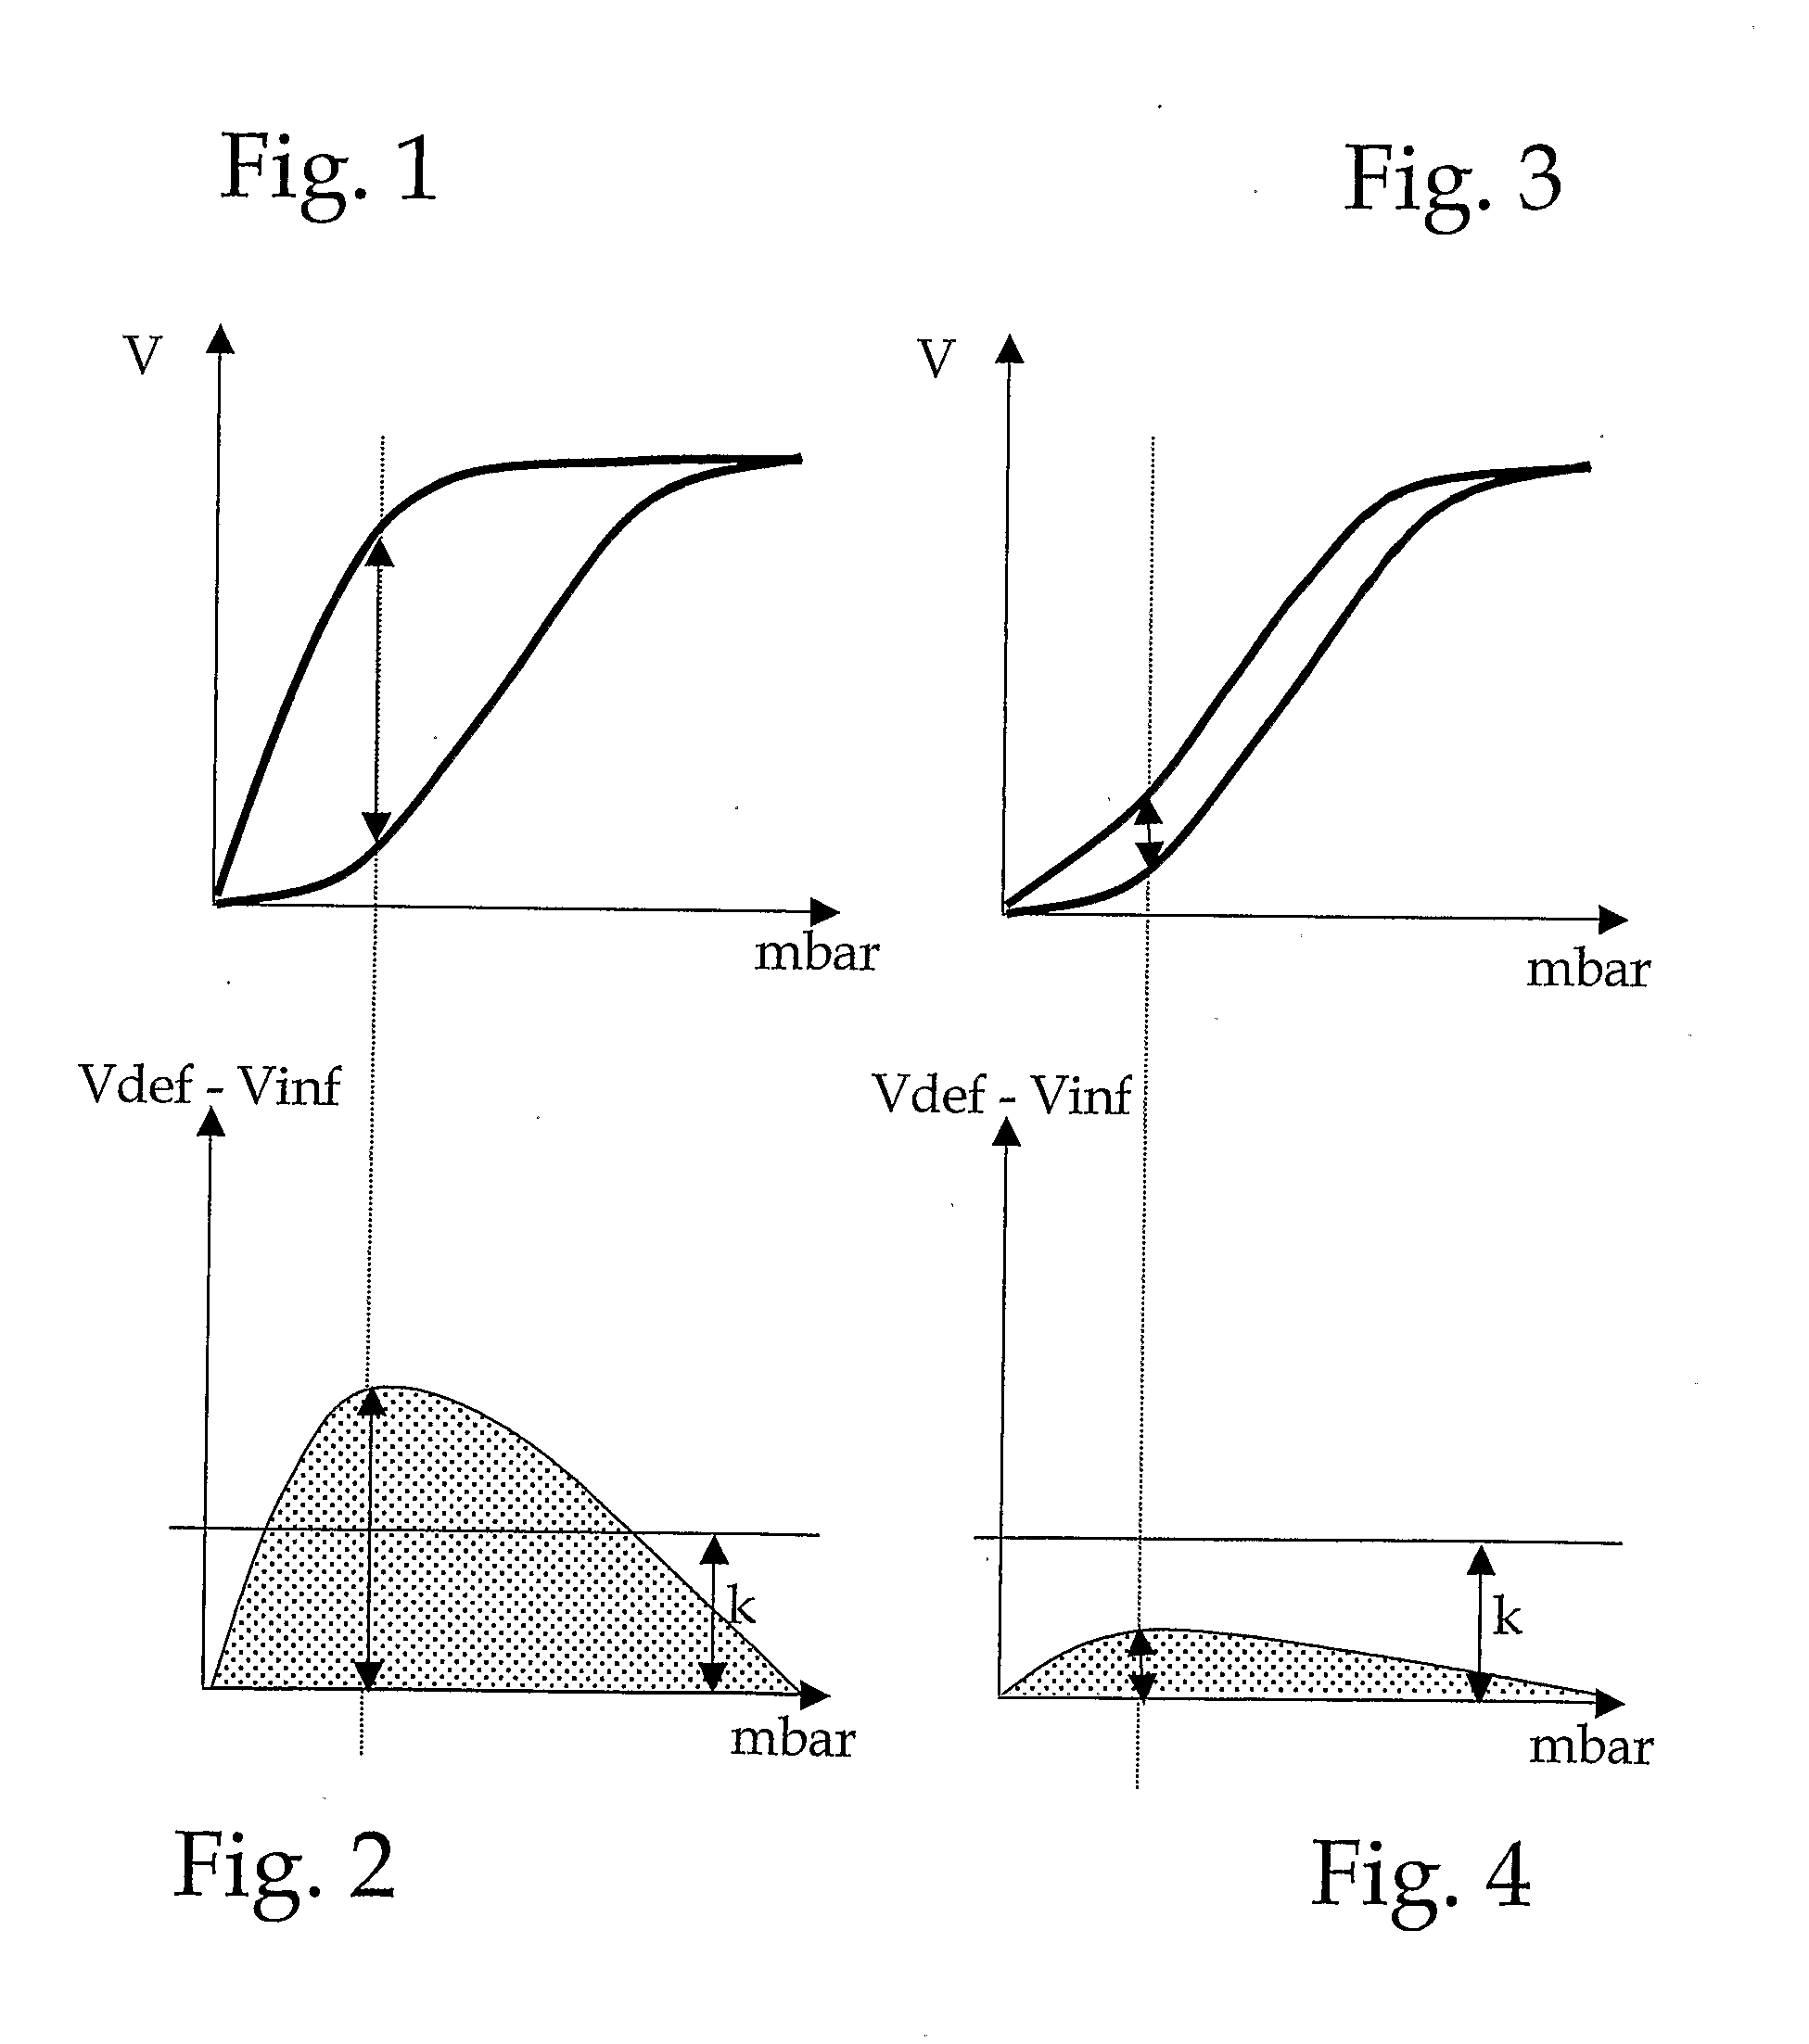 Method and device for determining the peep during the respiration of a patient